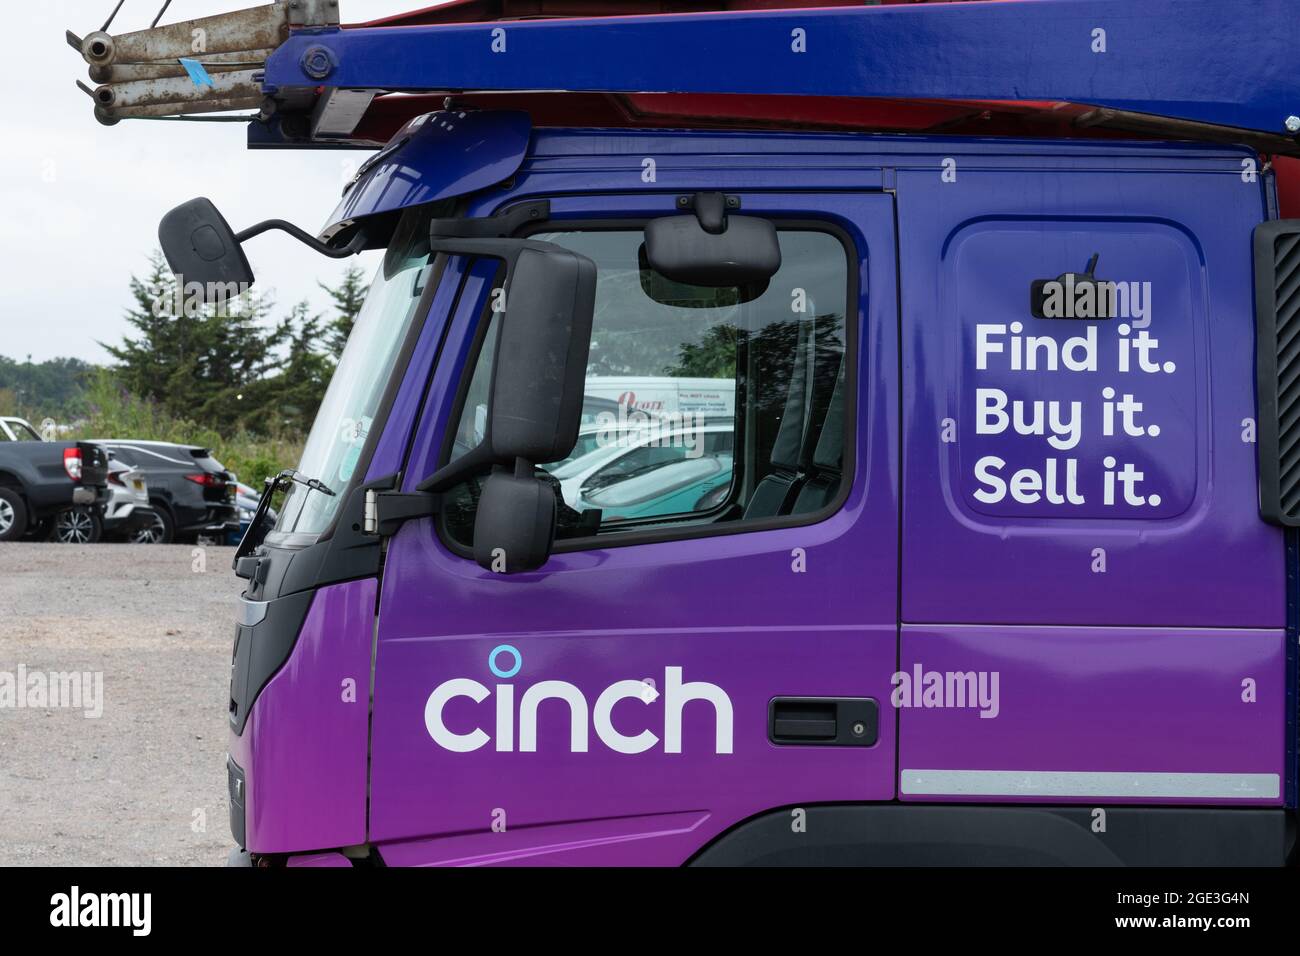 Cinch cars lorry truck transporter vehicle. Online used car sales business. Stock Photo